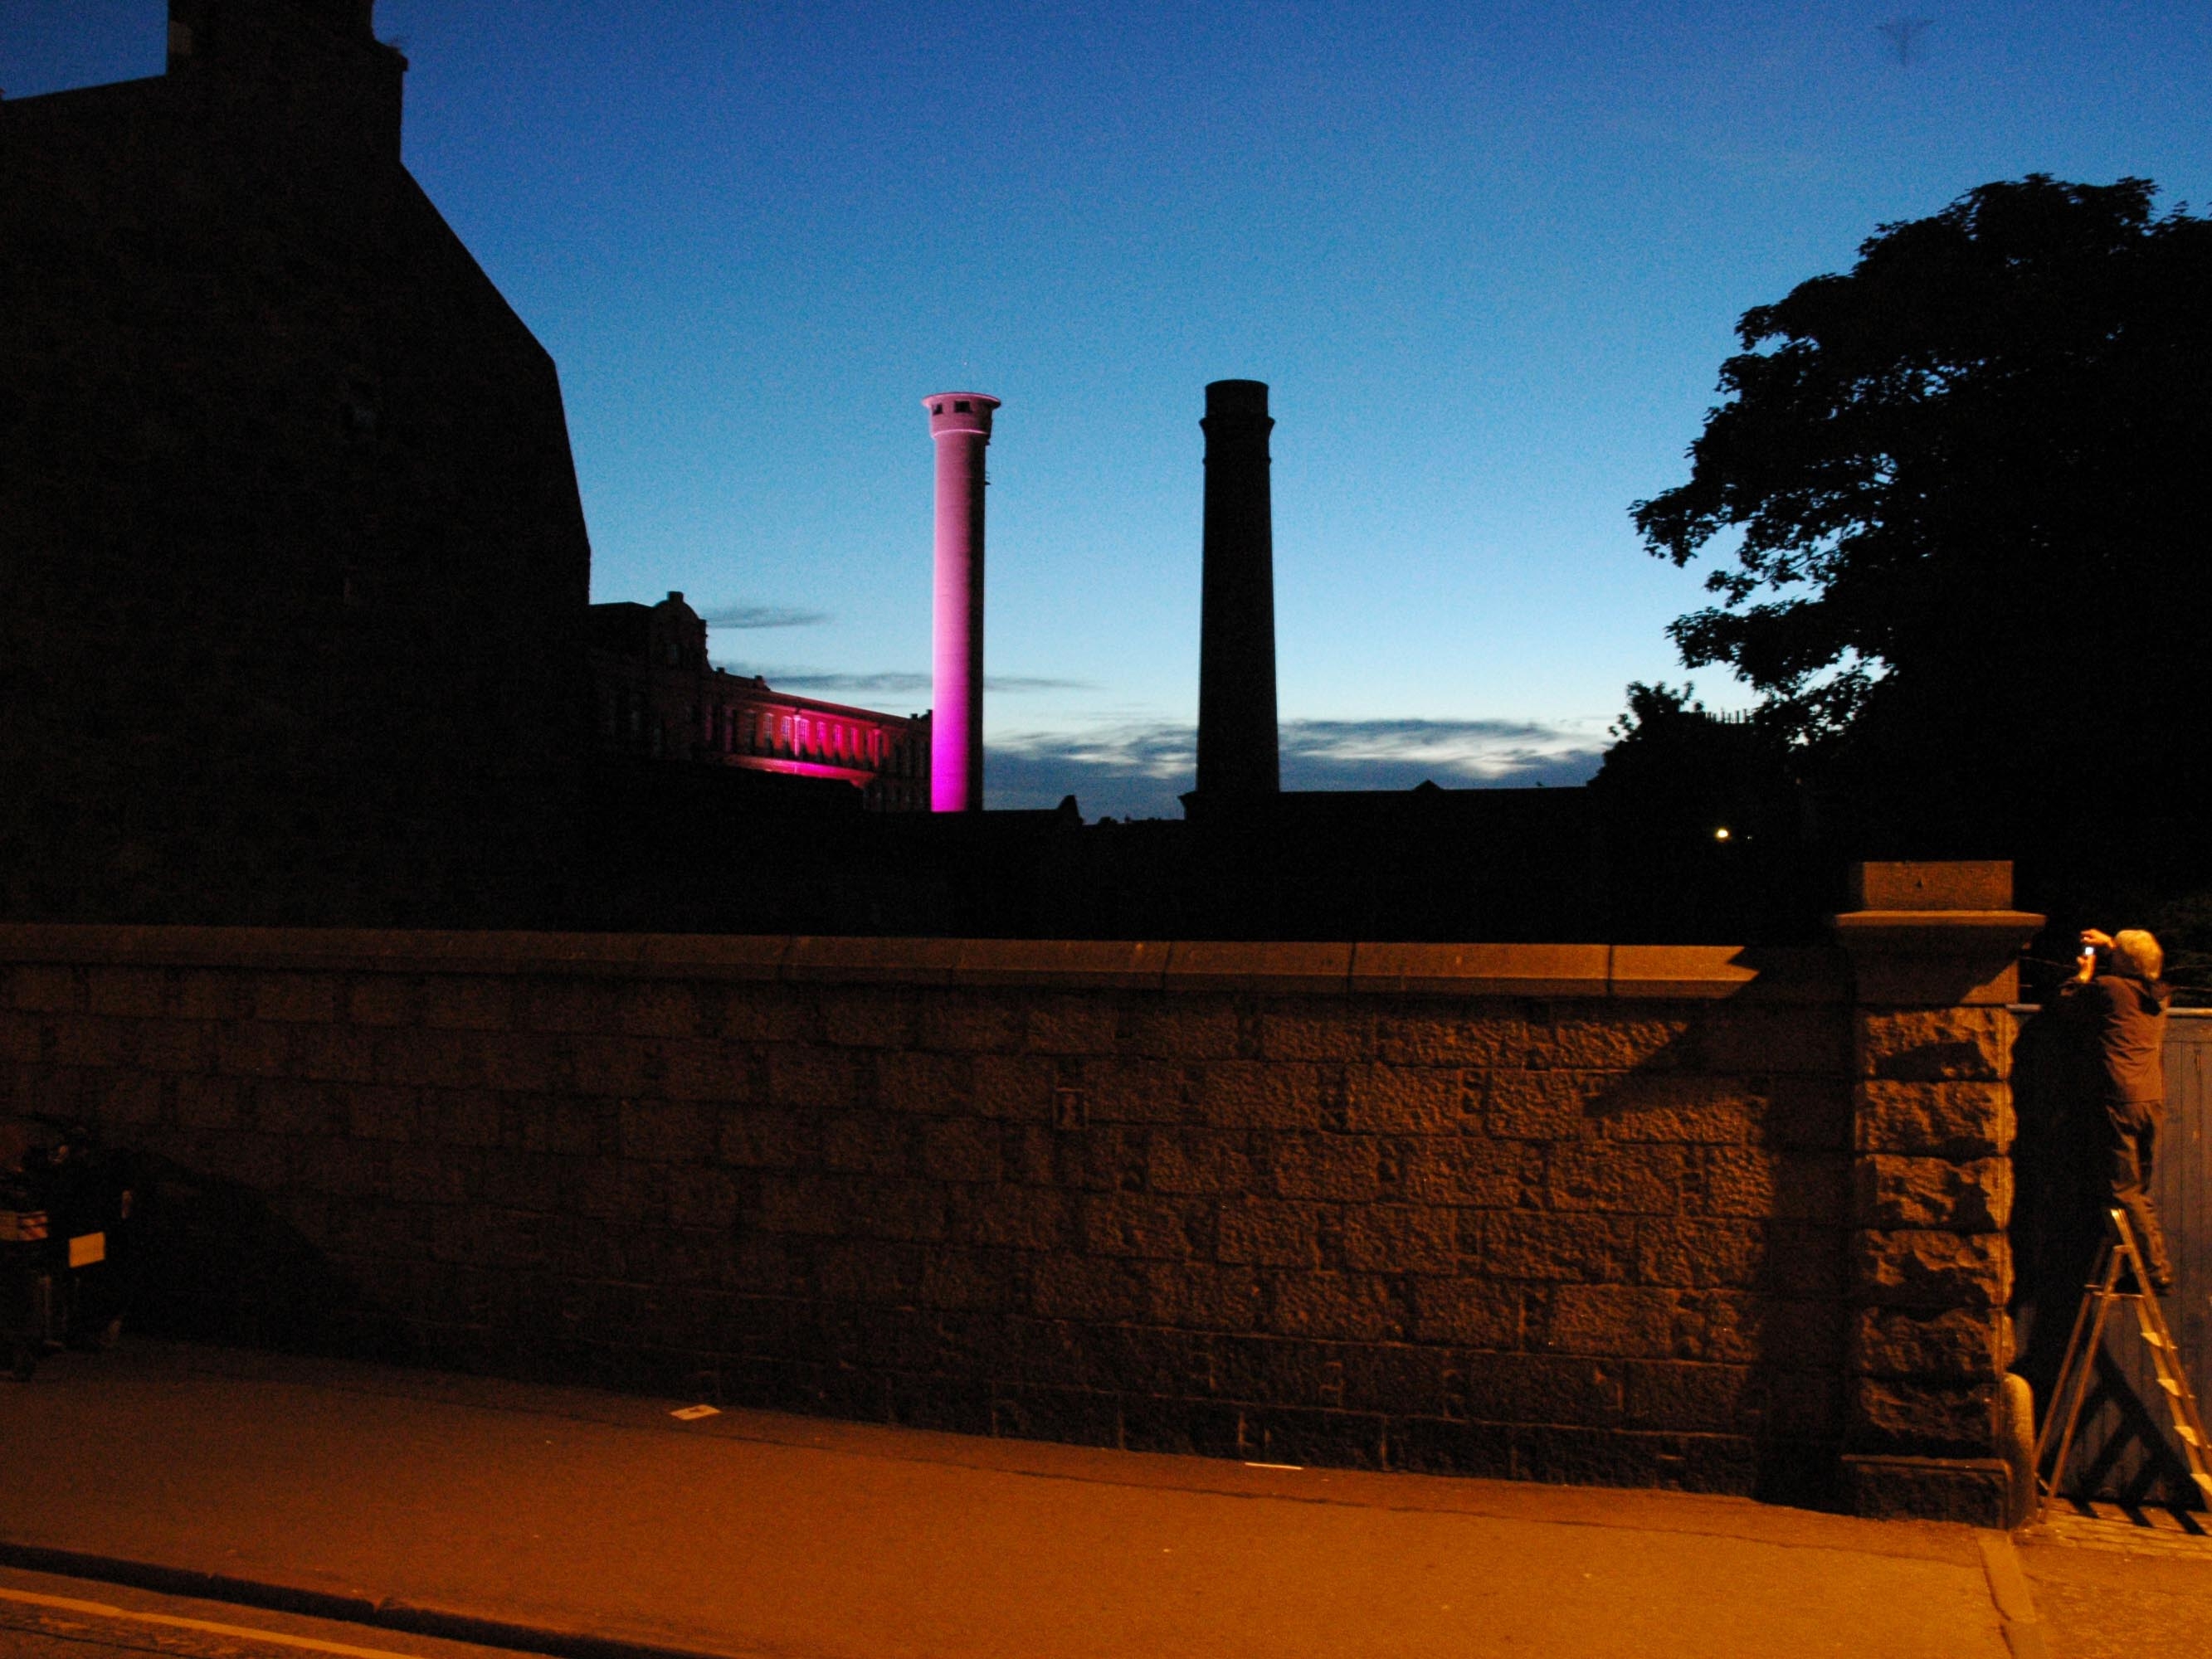 two factory towers seen over a granite wall, one is in dark shadow and the other is cast in a pink light